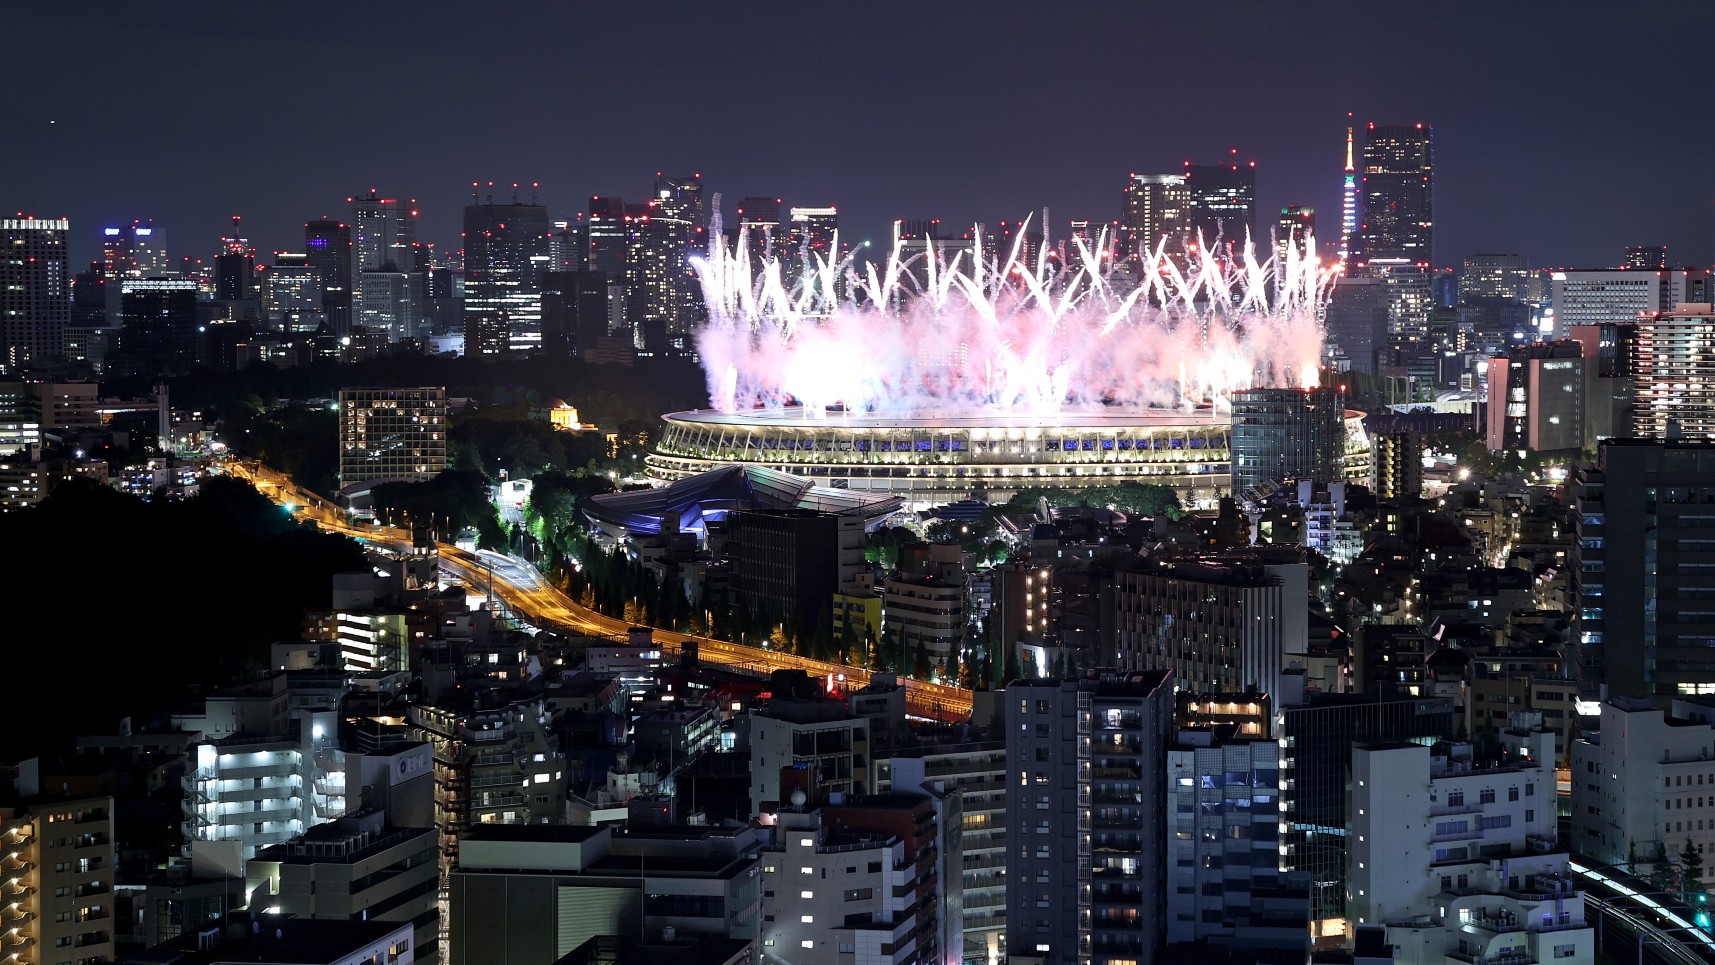 Fireworks erupt over Tokyo’s Olympic Stadium as the Games come to a close